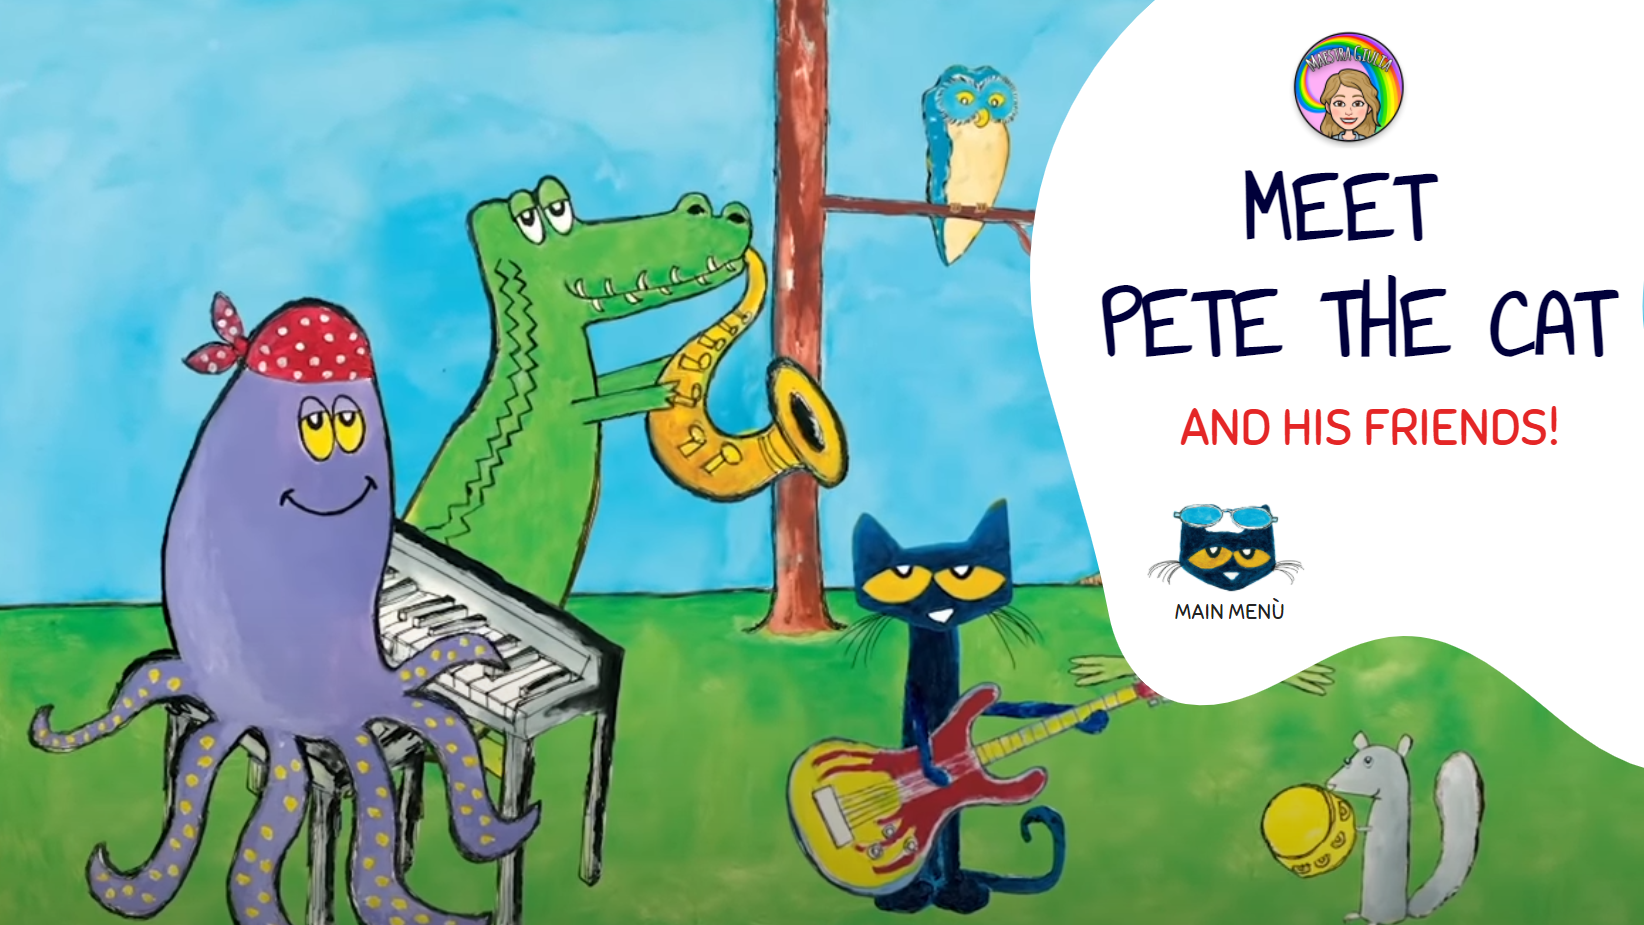 [Storytelling] Meet Pete the cat and his friends!